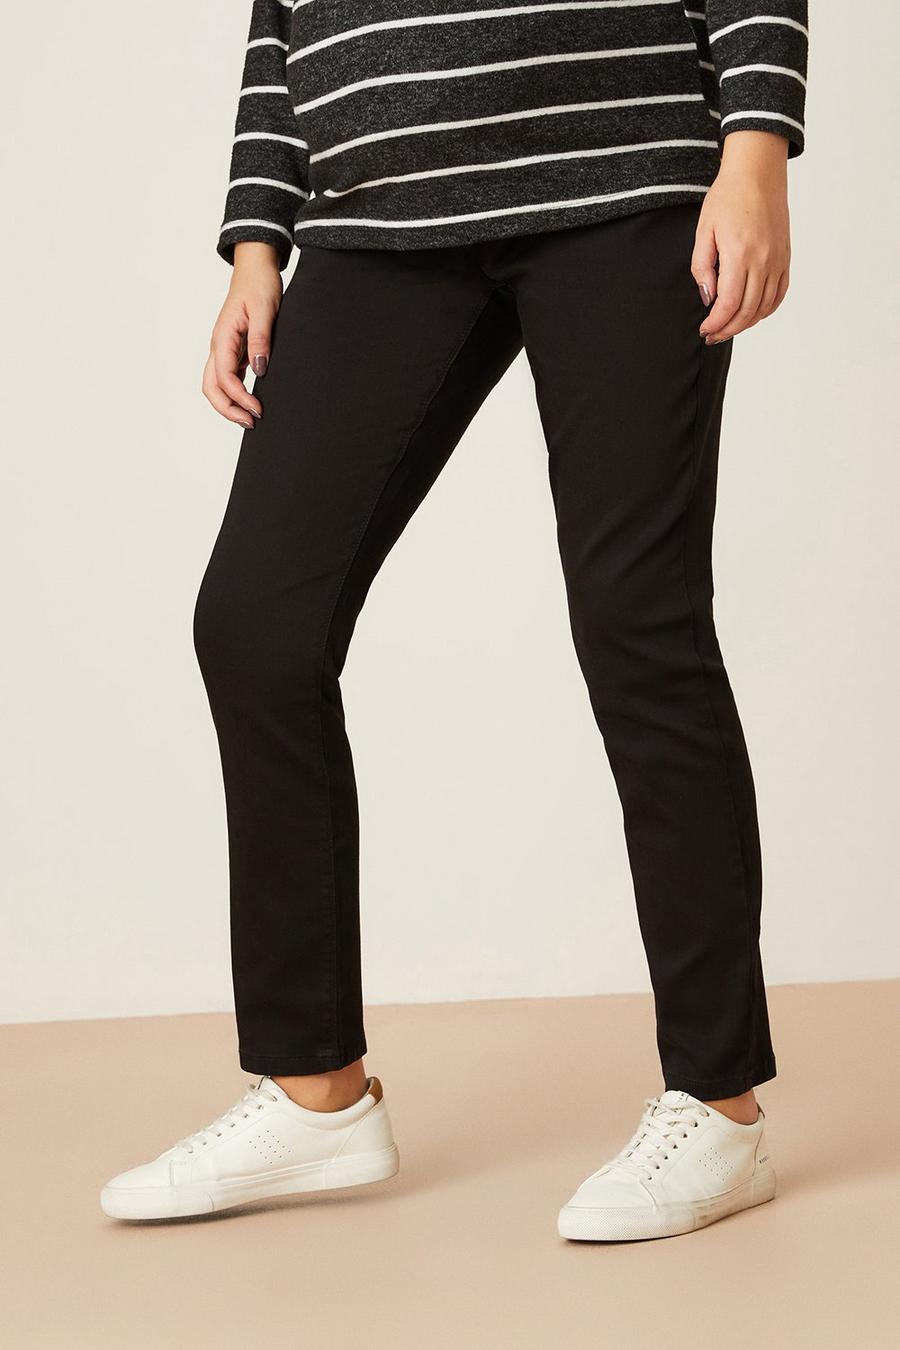 Maternity Over Bump Frankie Jeans